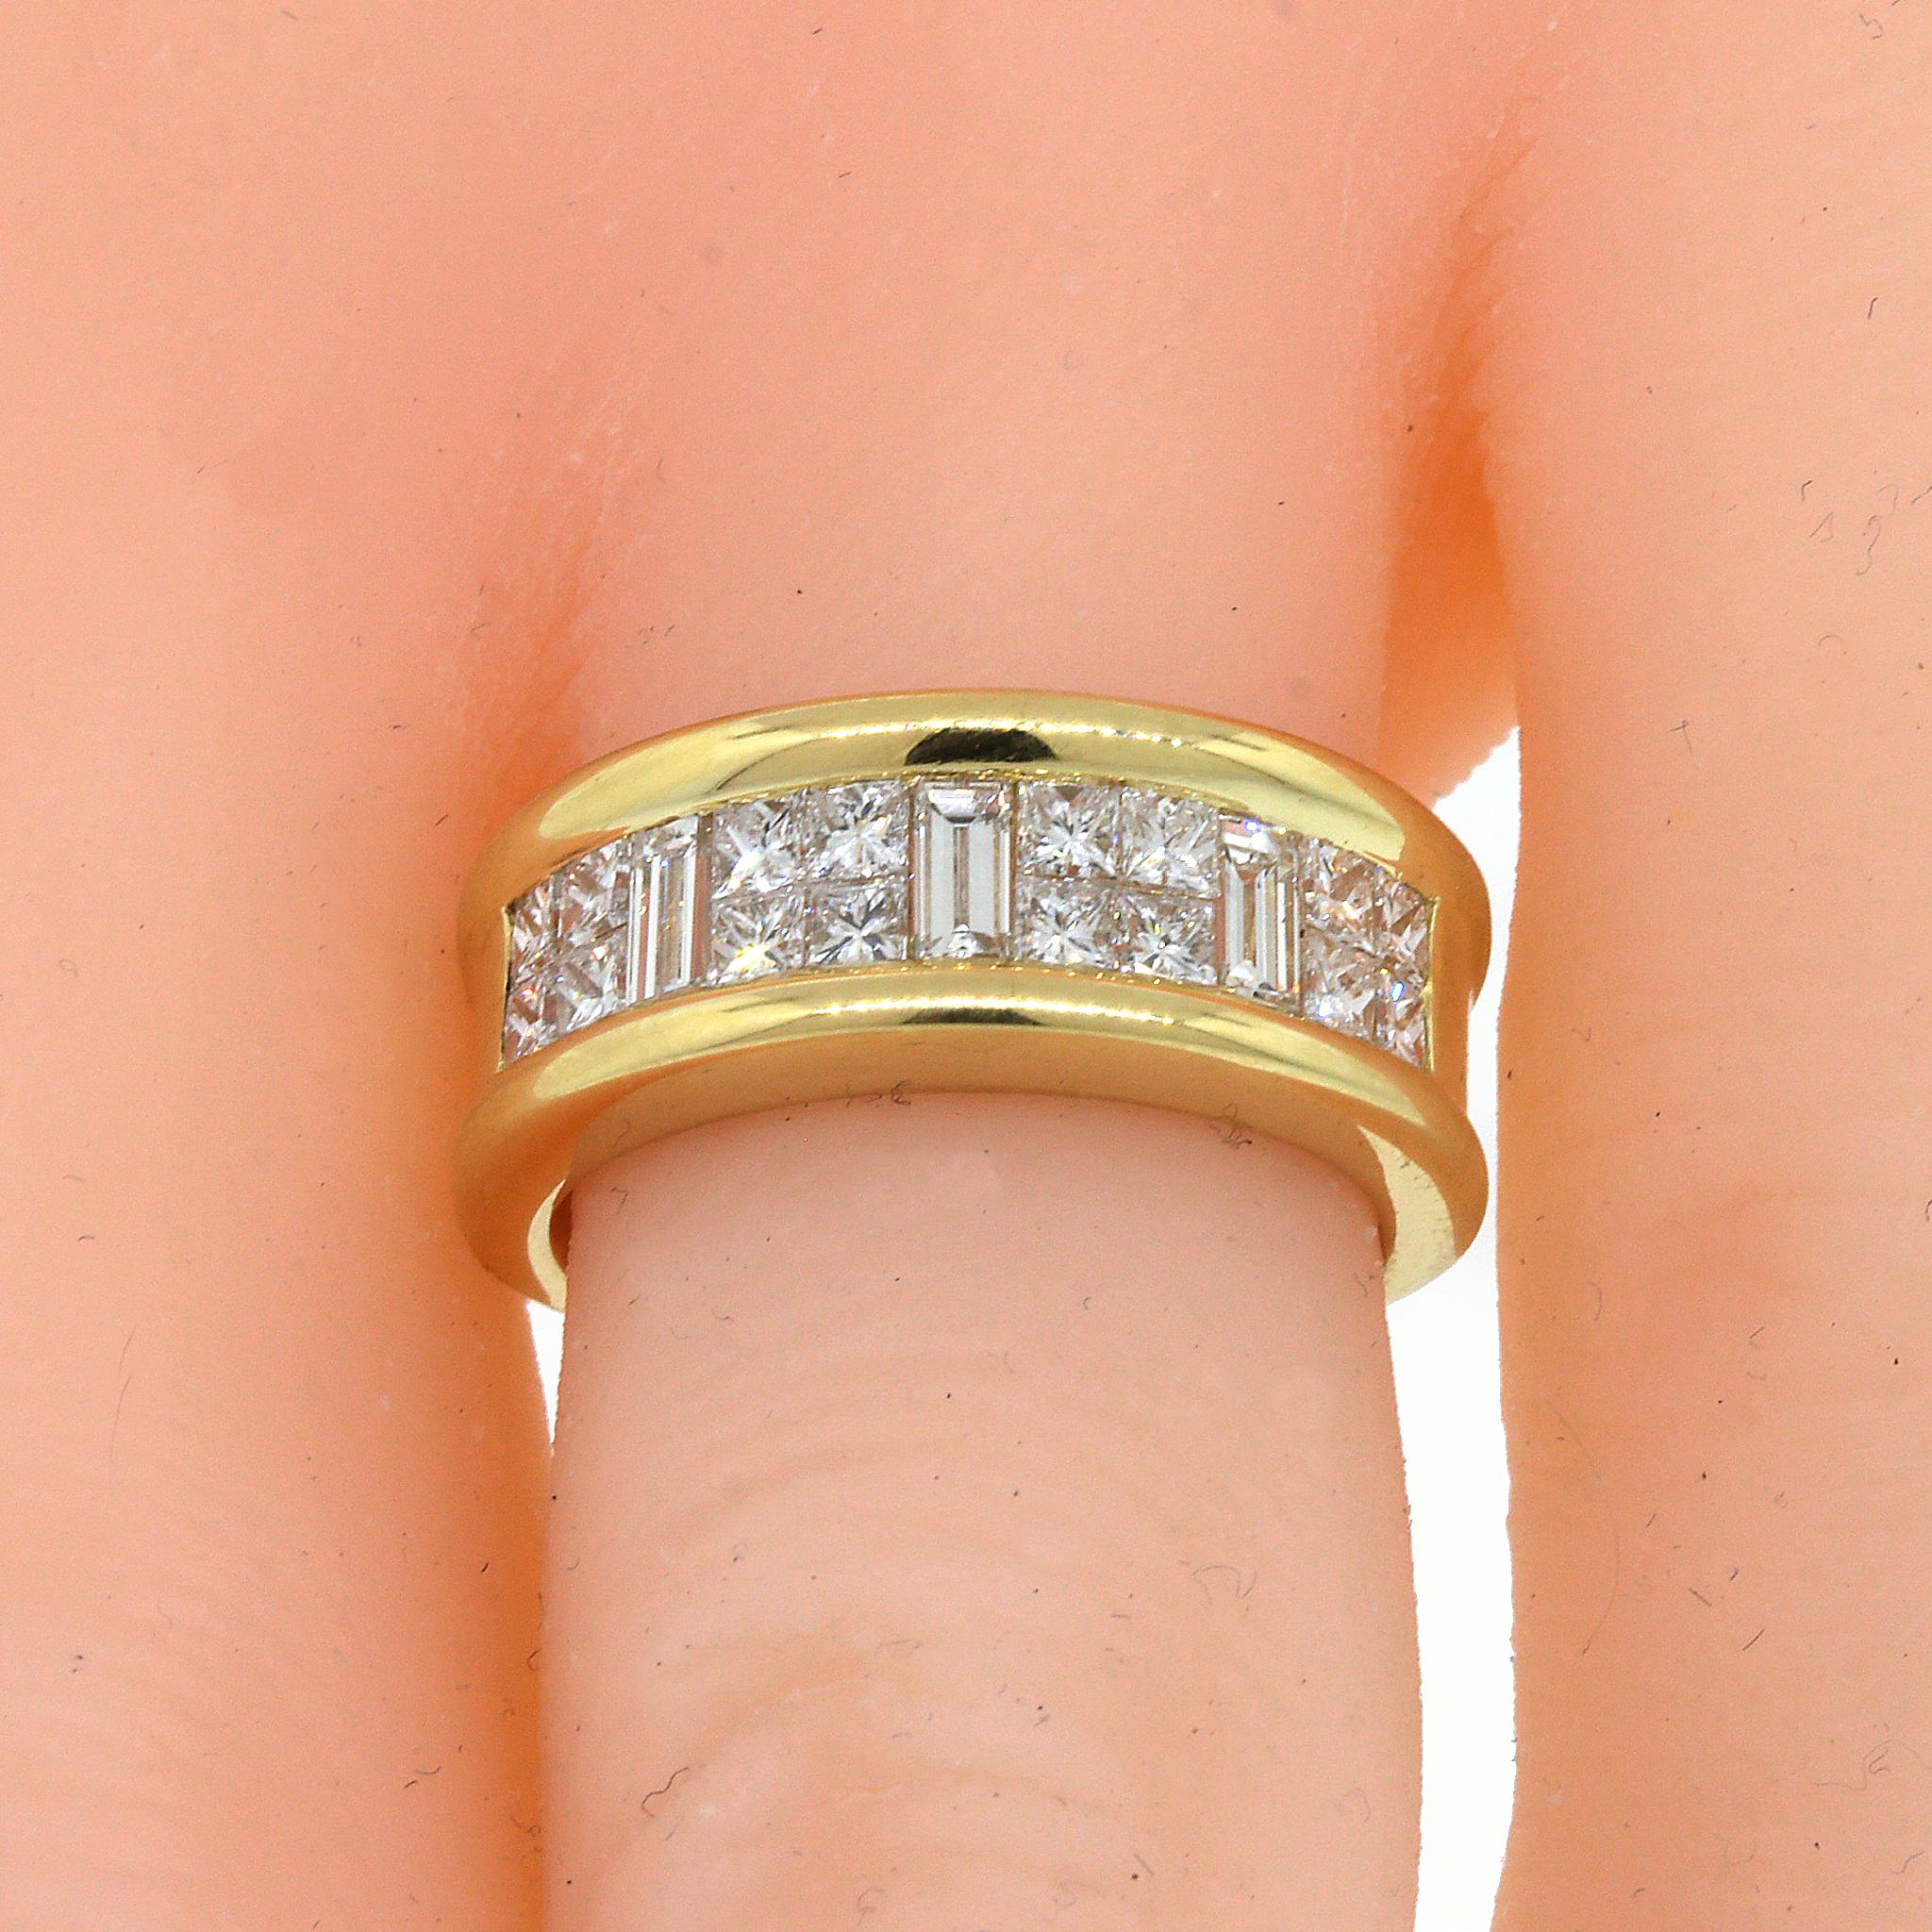 18 kt Yellow Gold
Diamond: 1.00 ct twd
Ring Size: 5
Total Weight: 